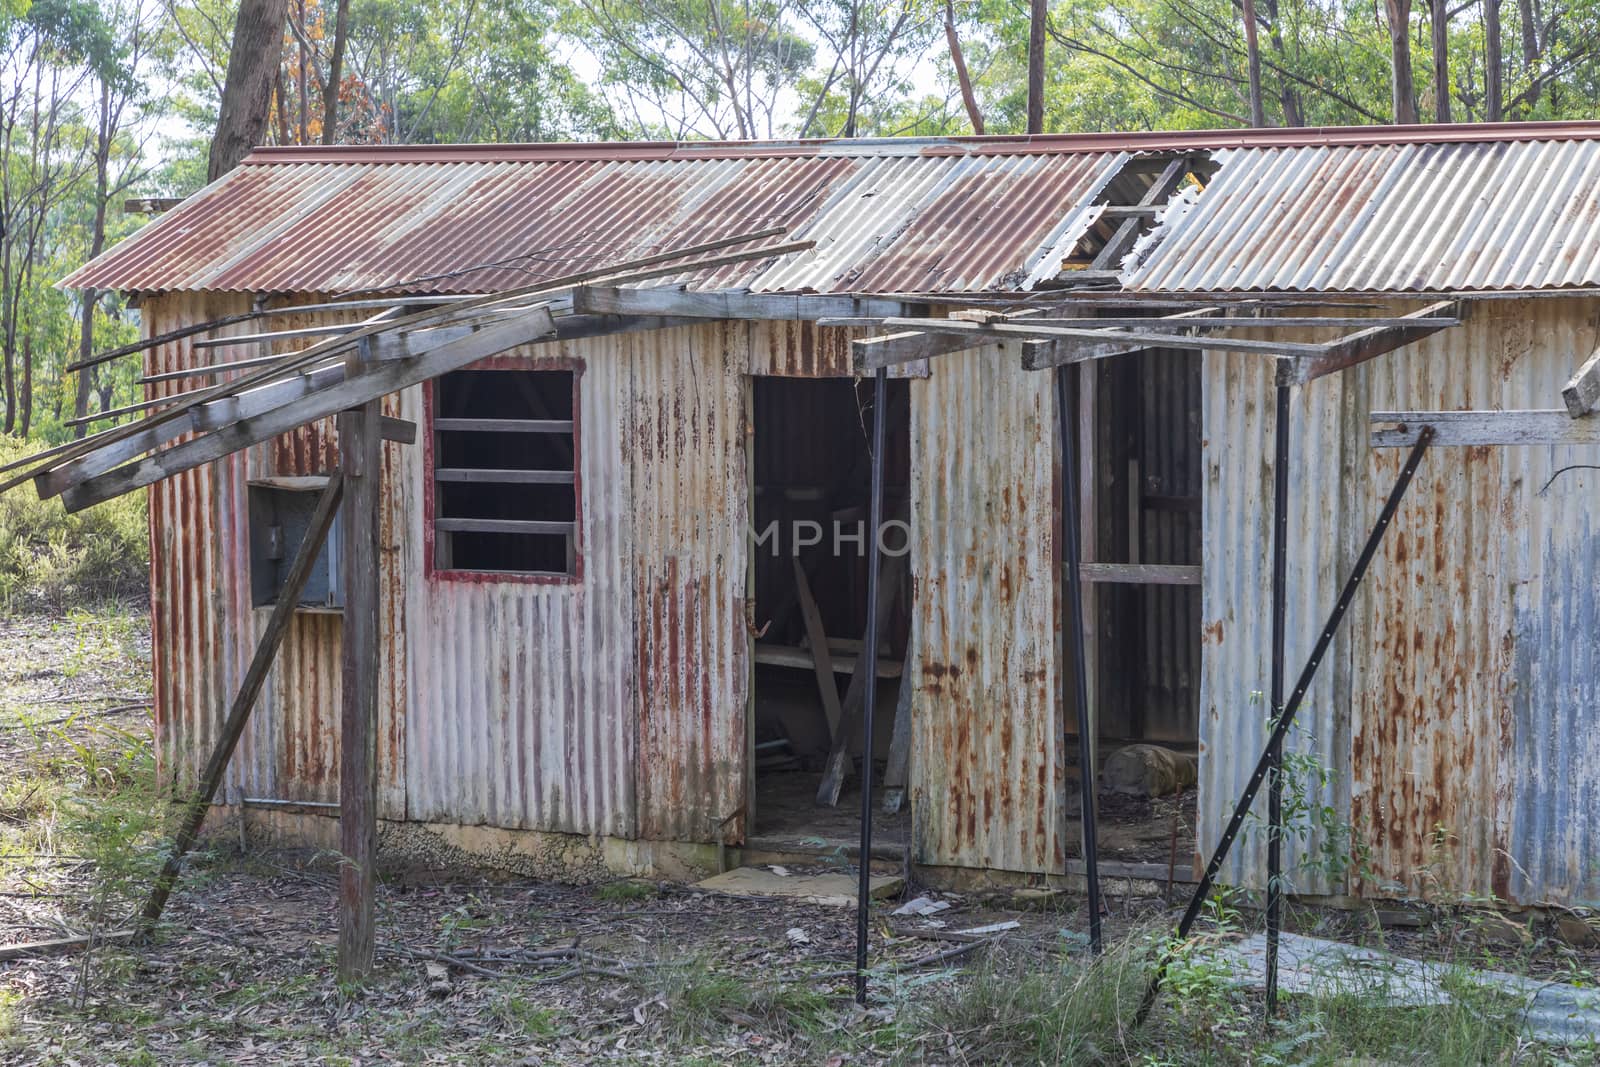 An old dilapidated building in the Wollemi National Park in Australia by WittkePhotos